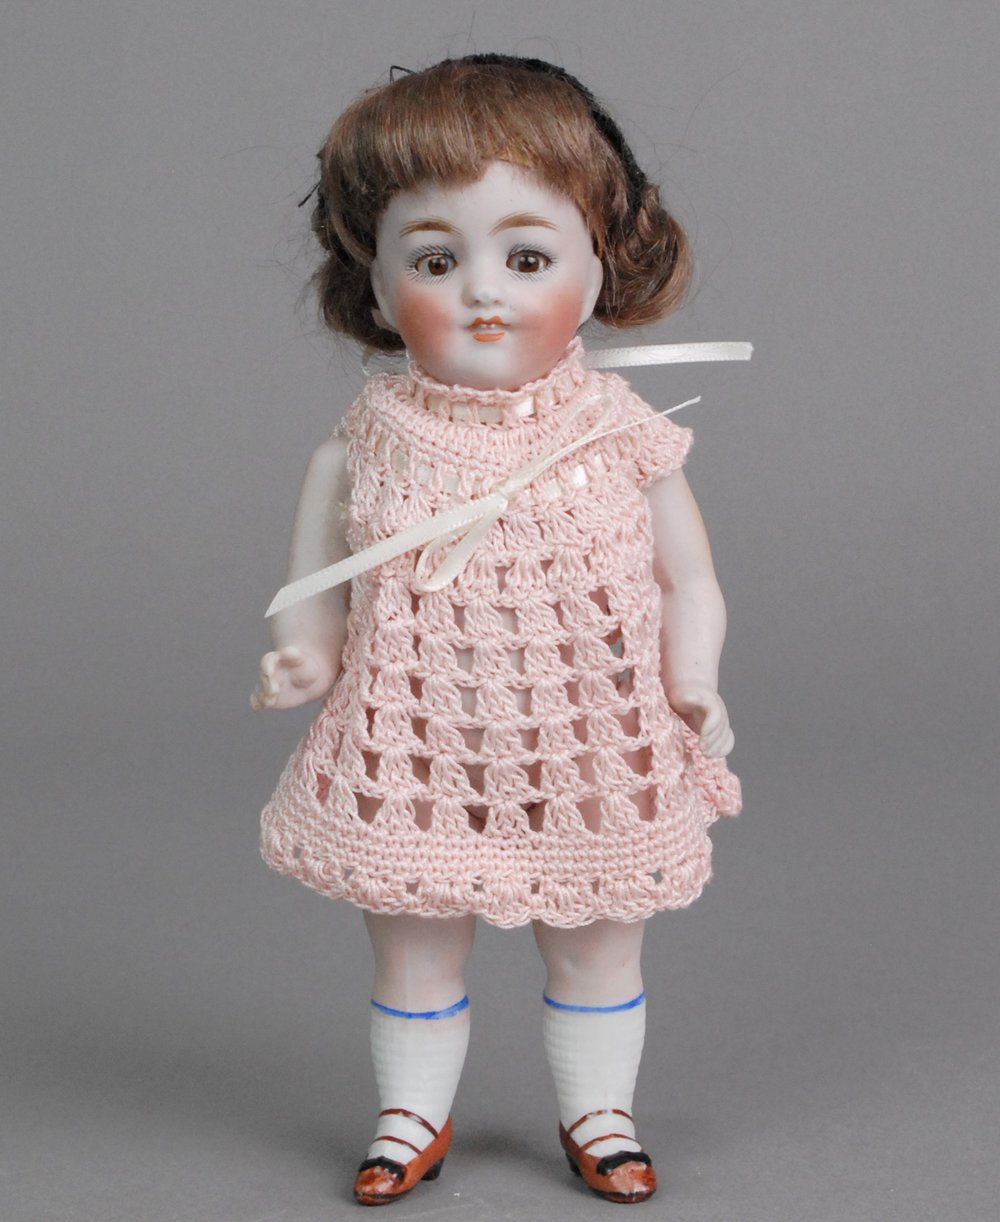 bisque doll - Wiktionary, the free dictionary